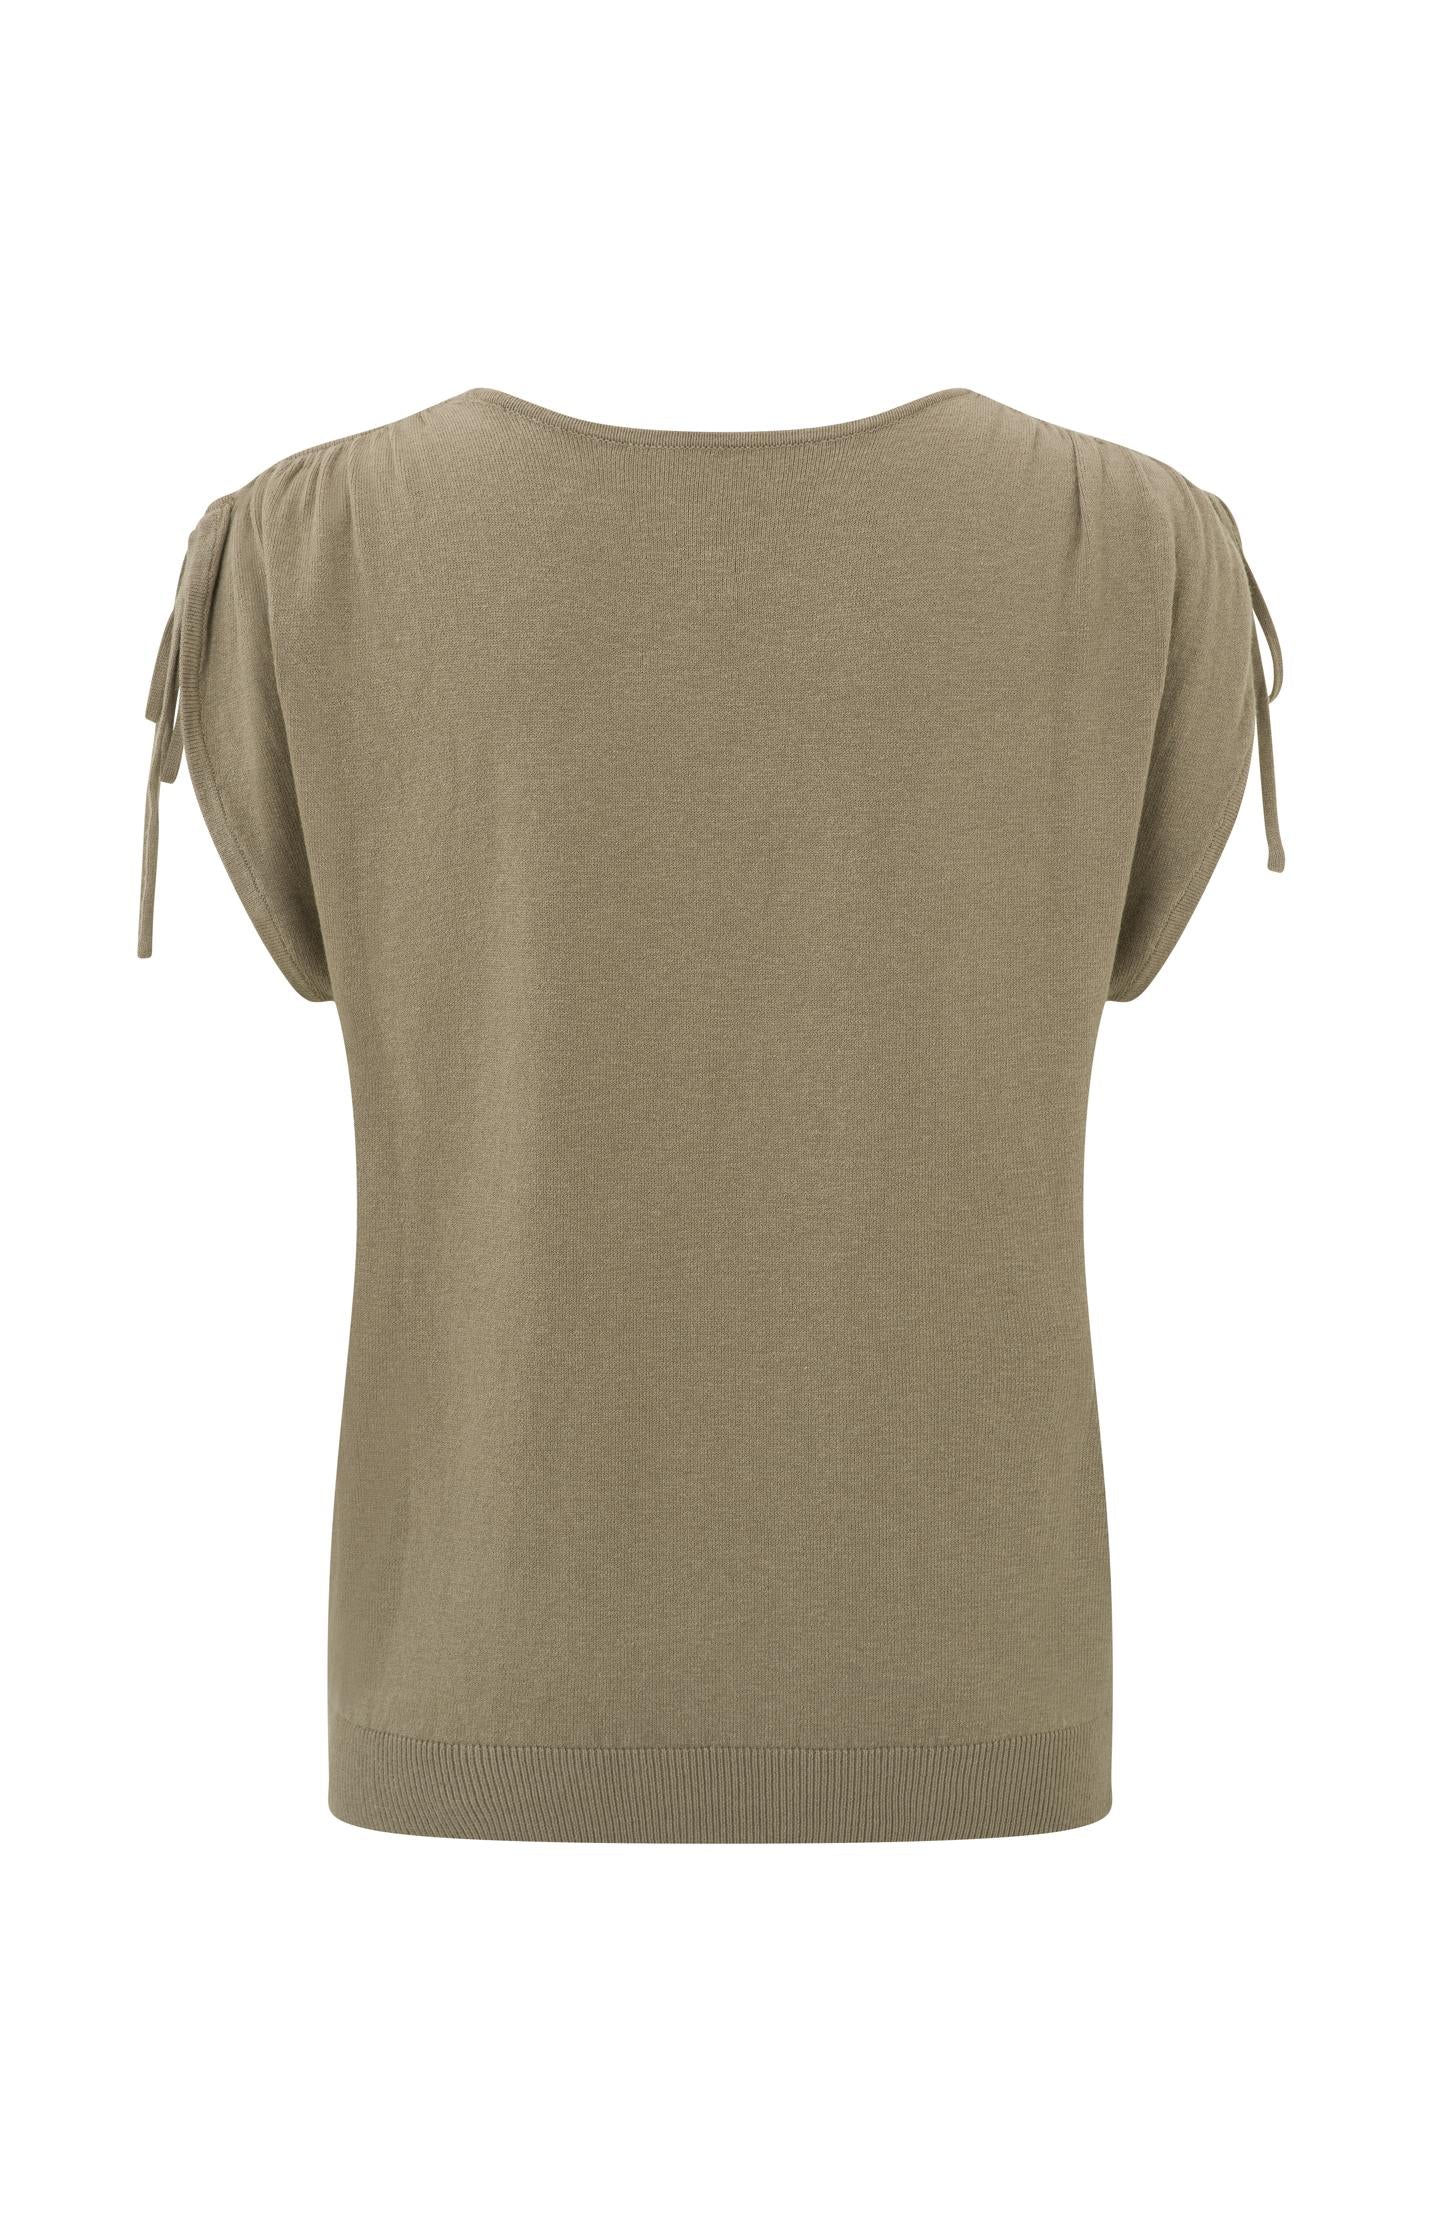 Sweater with round neck, short sleeves and shoulder details